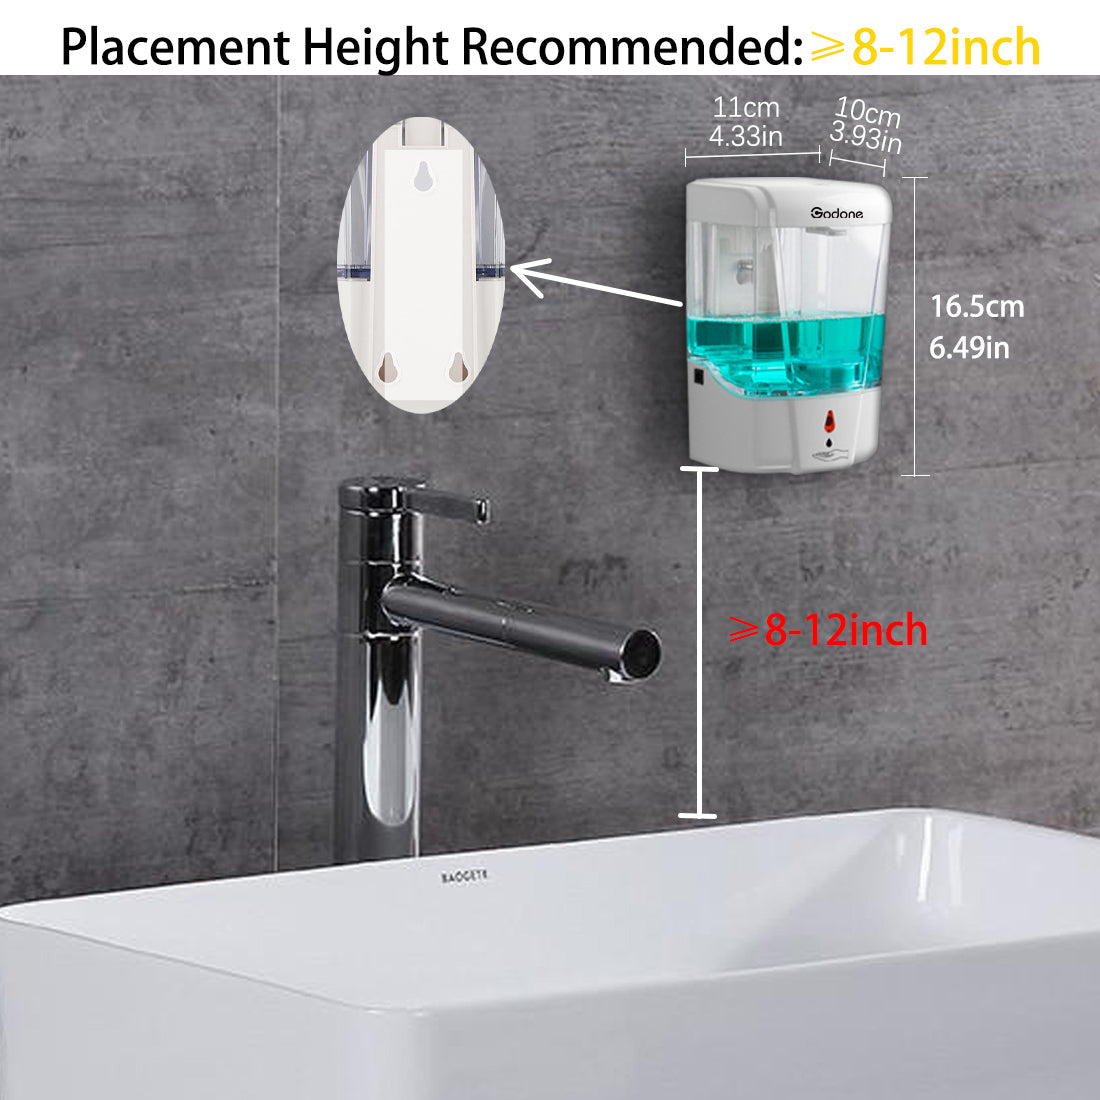 Wall-mounted automatic soap dispenser EXTREME WS - SUPRATECH